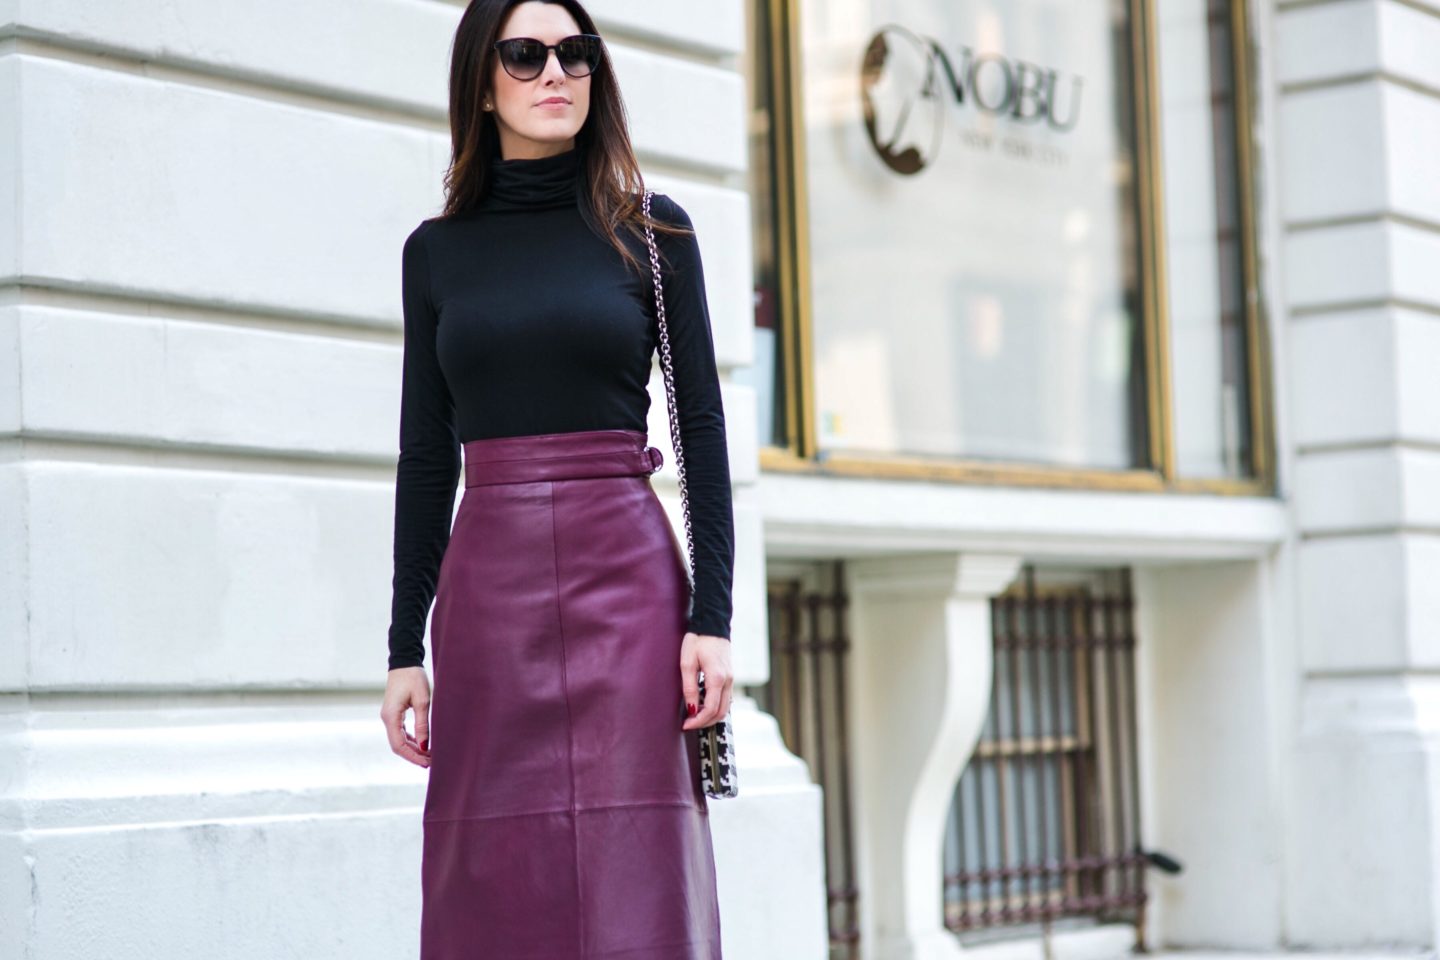 Styling Now: Burgundy and Black